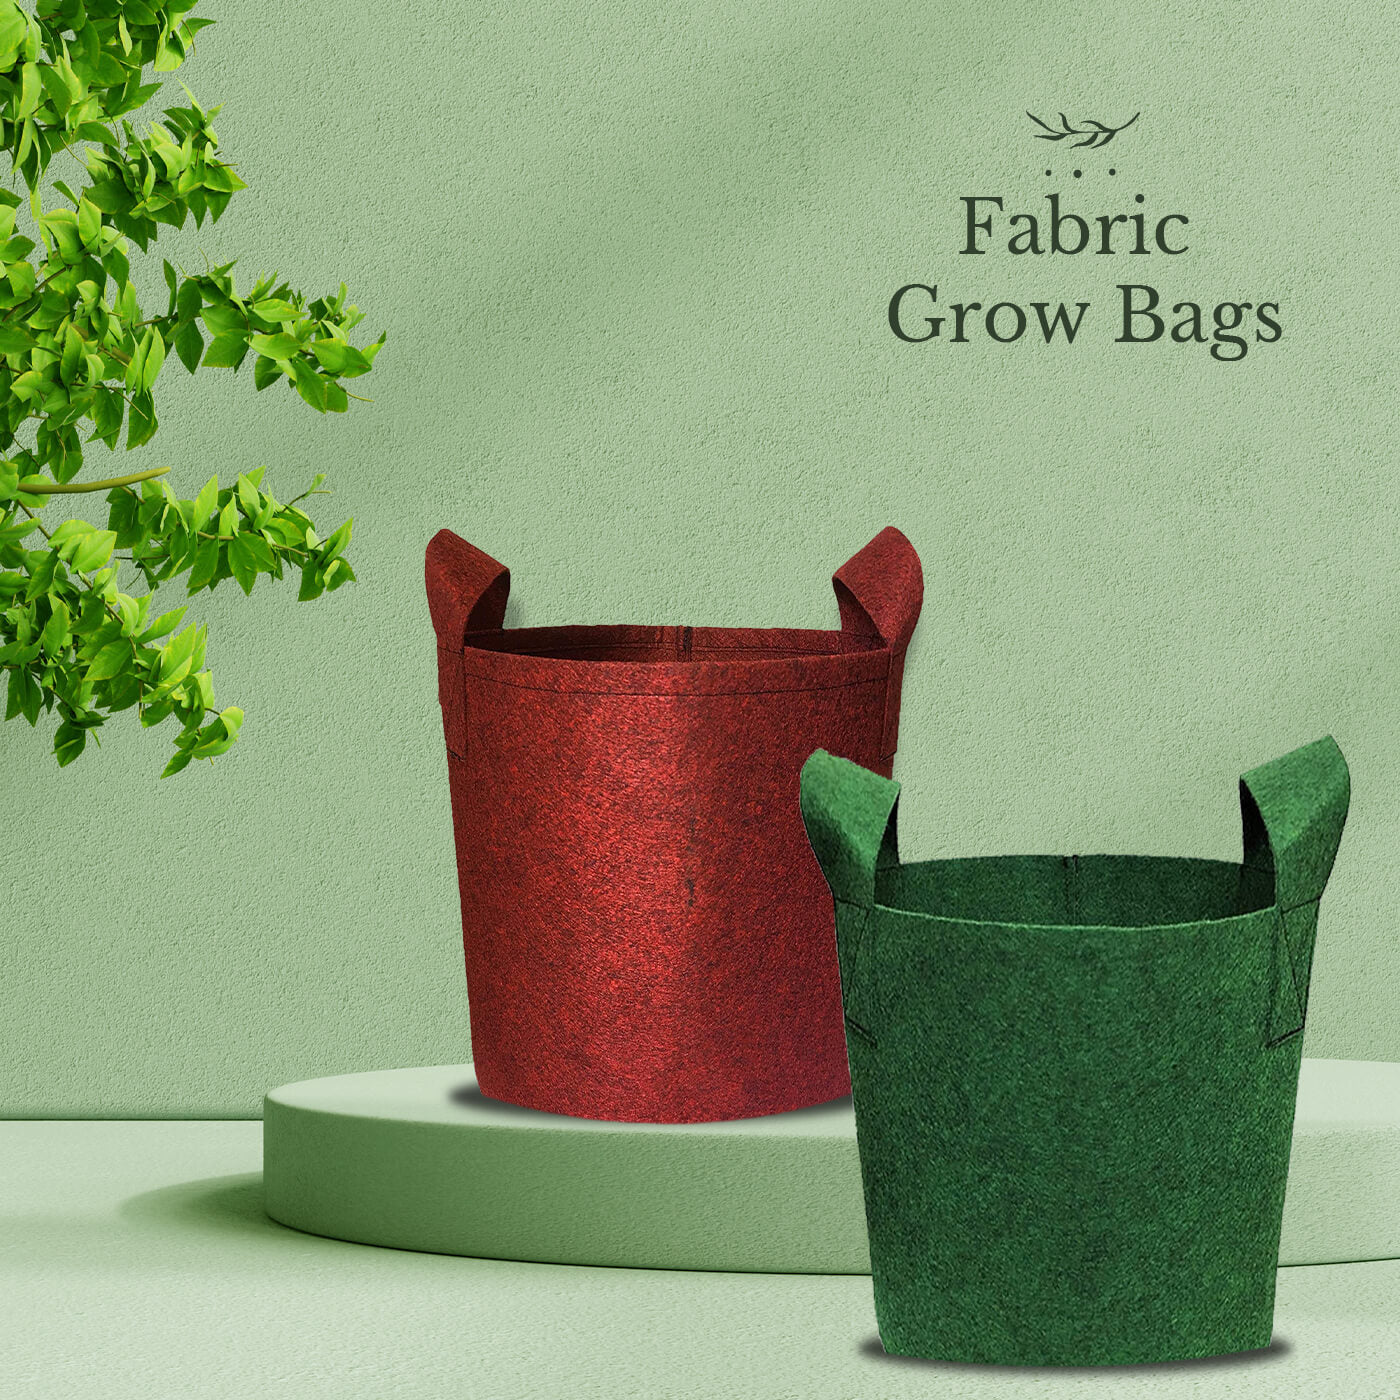 Amazon.com : EBOCACB 3 pcs Hanging Planter Bag with Handles, Plastic  Hanging Strawberry Planting Containers Strawberry Grow Bags Foldable  Durable Growing Bags Grow Planter for Growing Vegetables Flowers Herb Plant  : Patio,